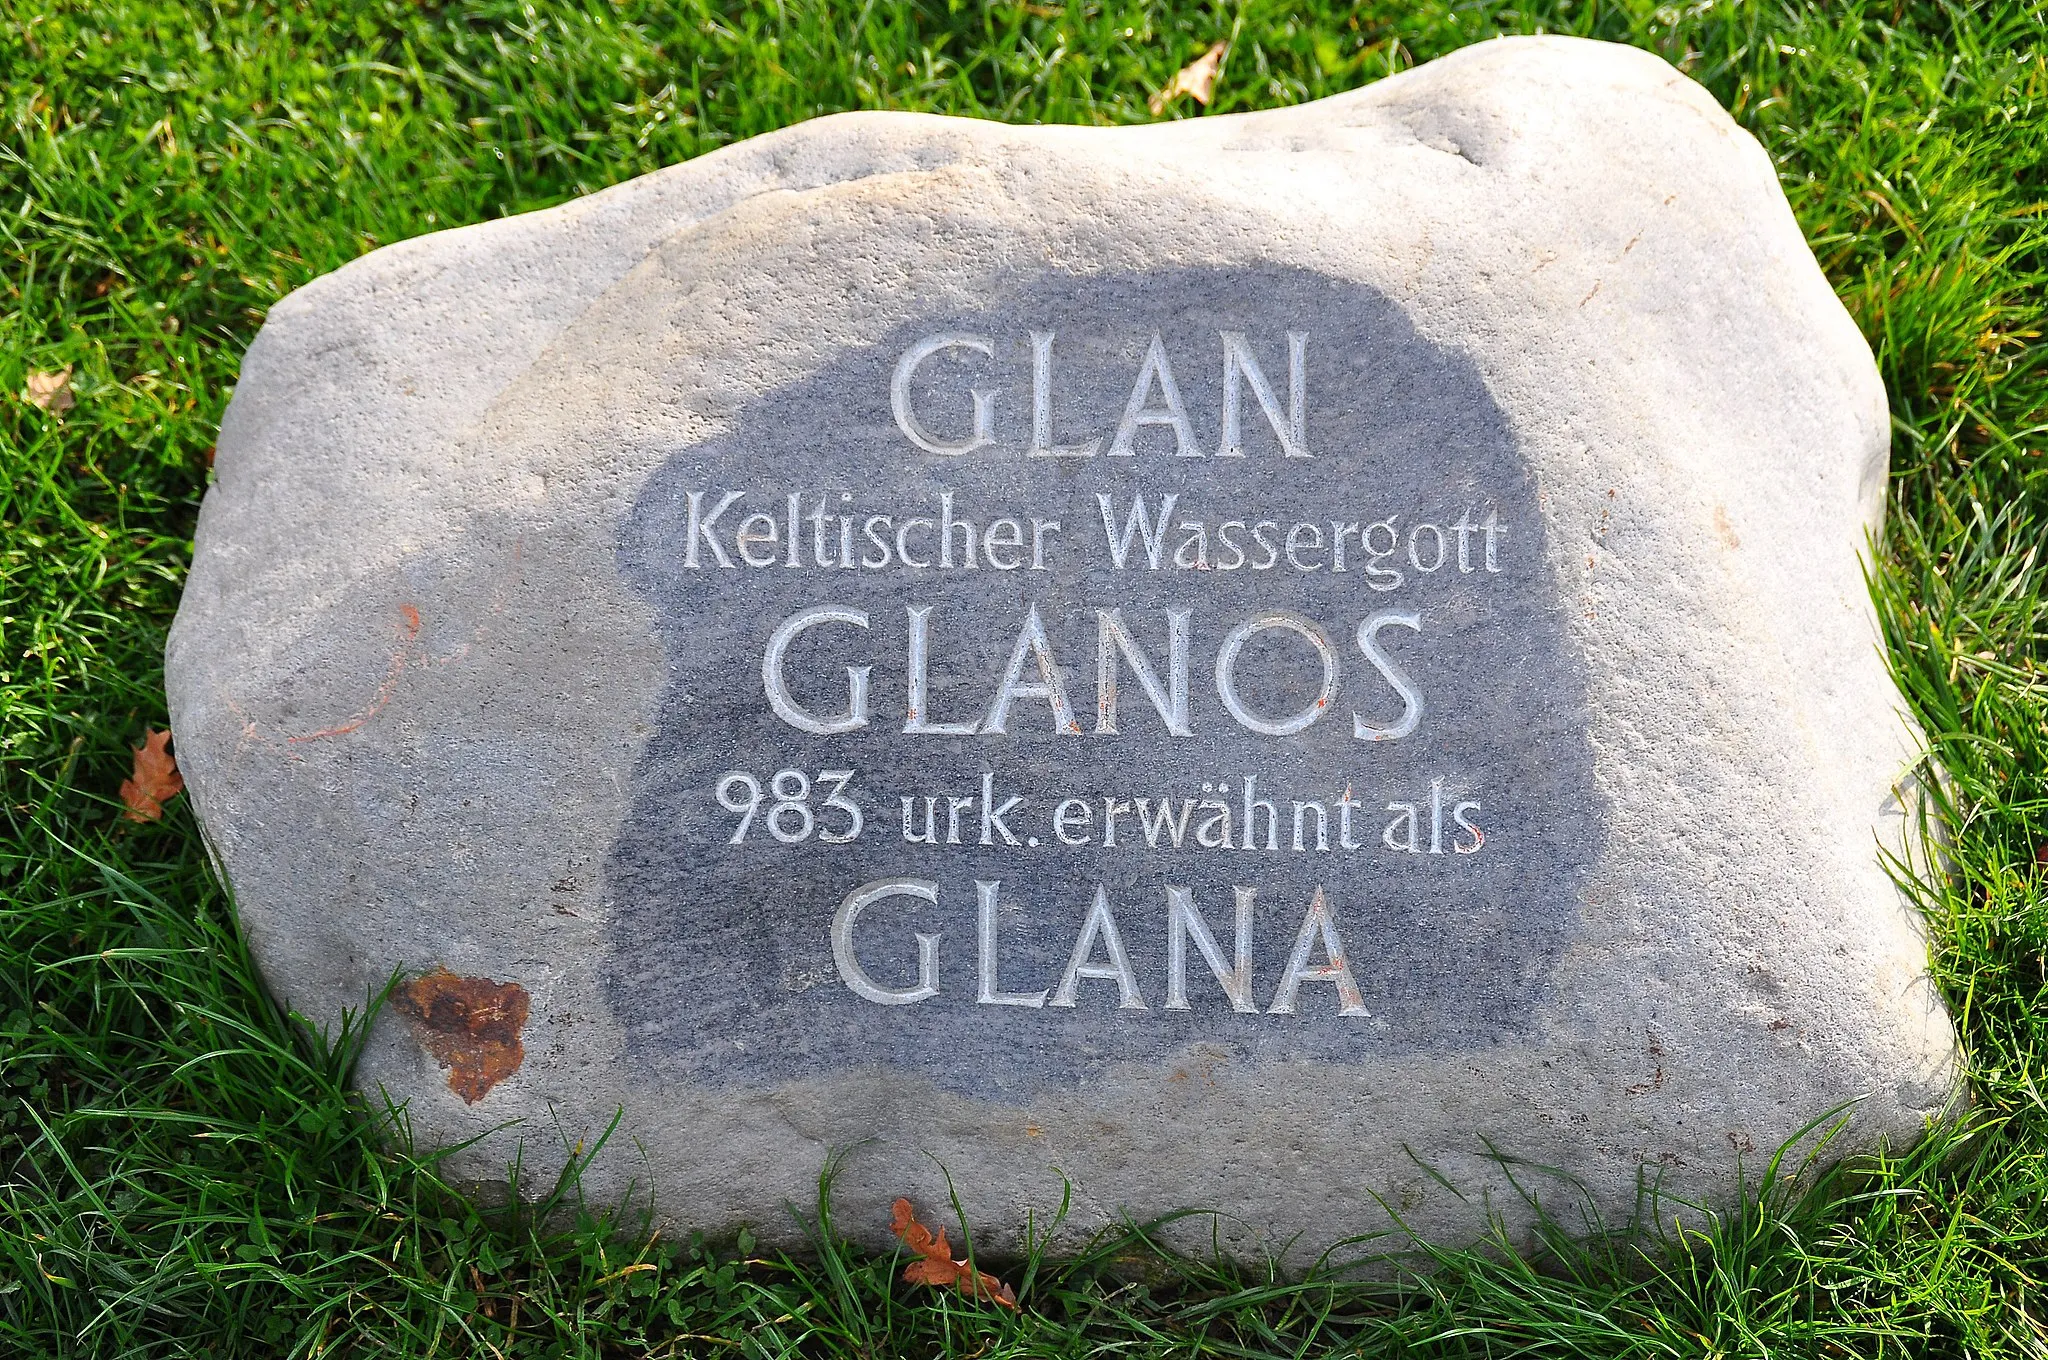 Photo showing: Inscribed stone for the honour of the Celtic God “Glanos” in the Glanpark along the Glan river, the Grete Bittner Street and the Feschnig street in 9th district “Annabichl” of Klagenfurt, Carinthia, Austria